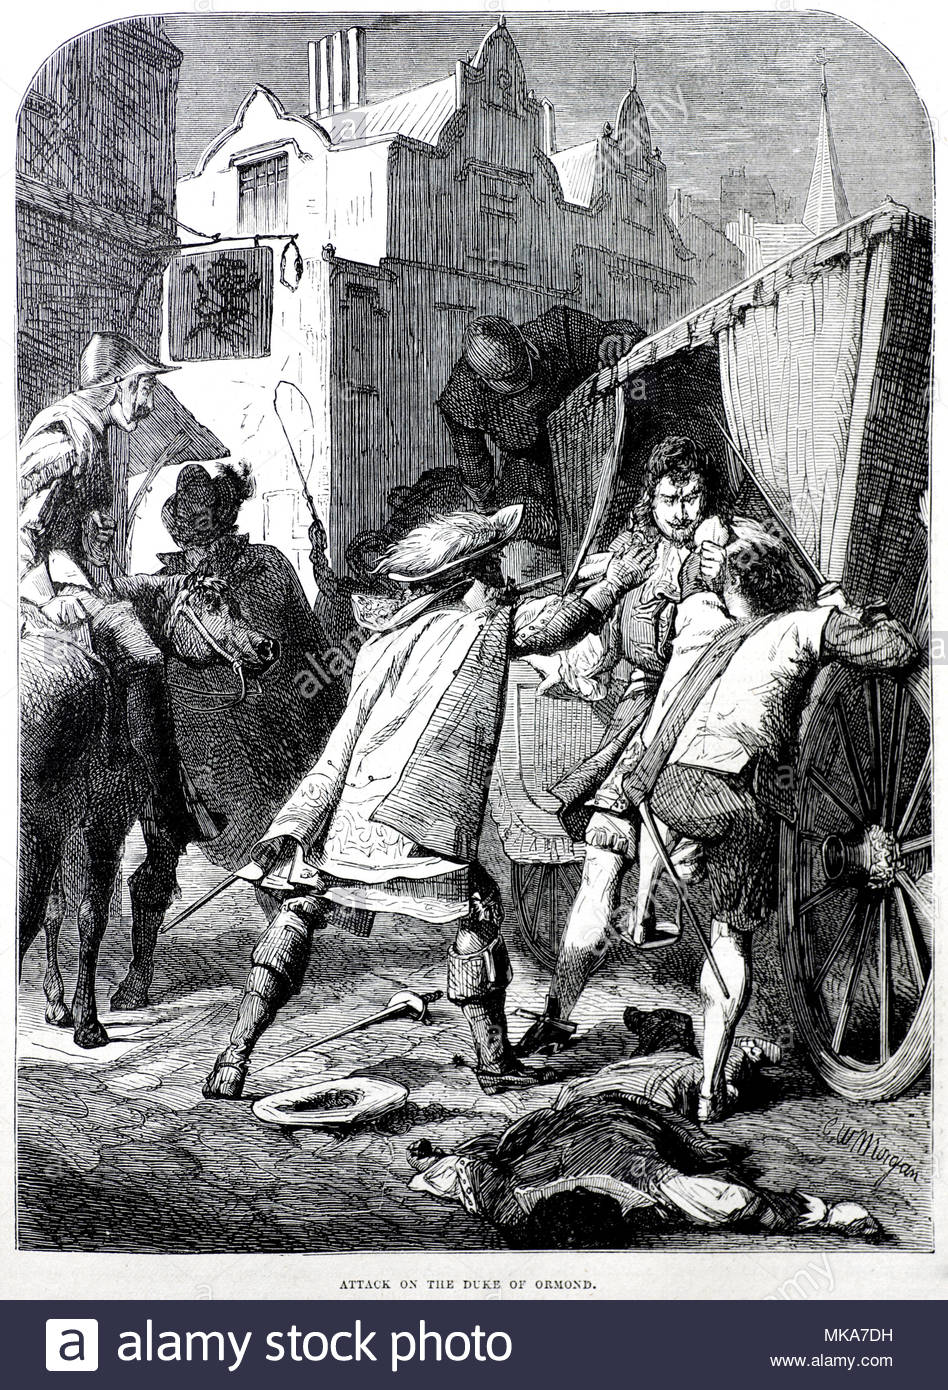 Attack on James Butler, 1st Duke of Ormond, 1610 – 1688, on 6th December 1670 by James Blood and his accomplaces, antique illustration from circa 1880 Stock Photo